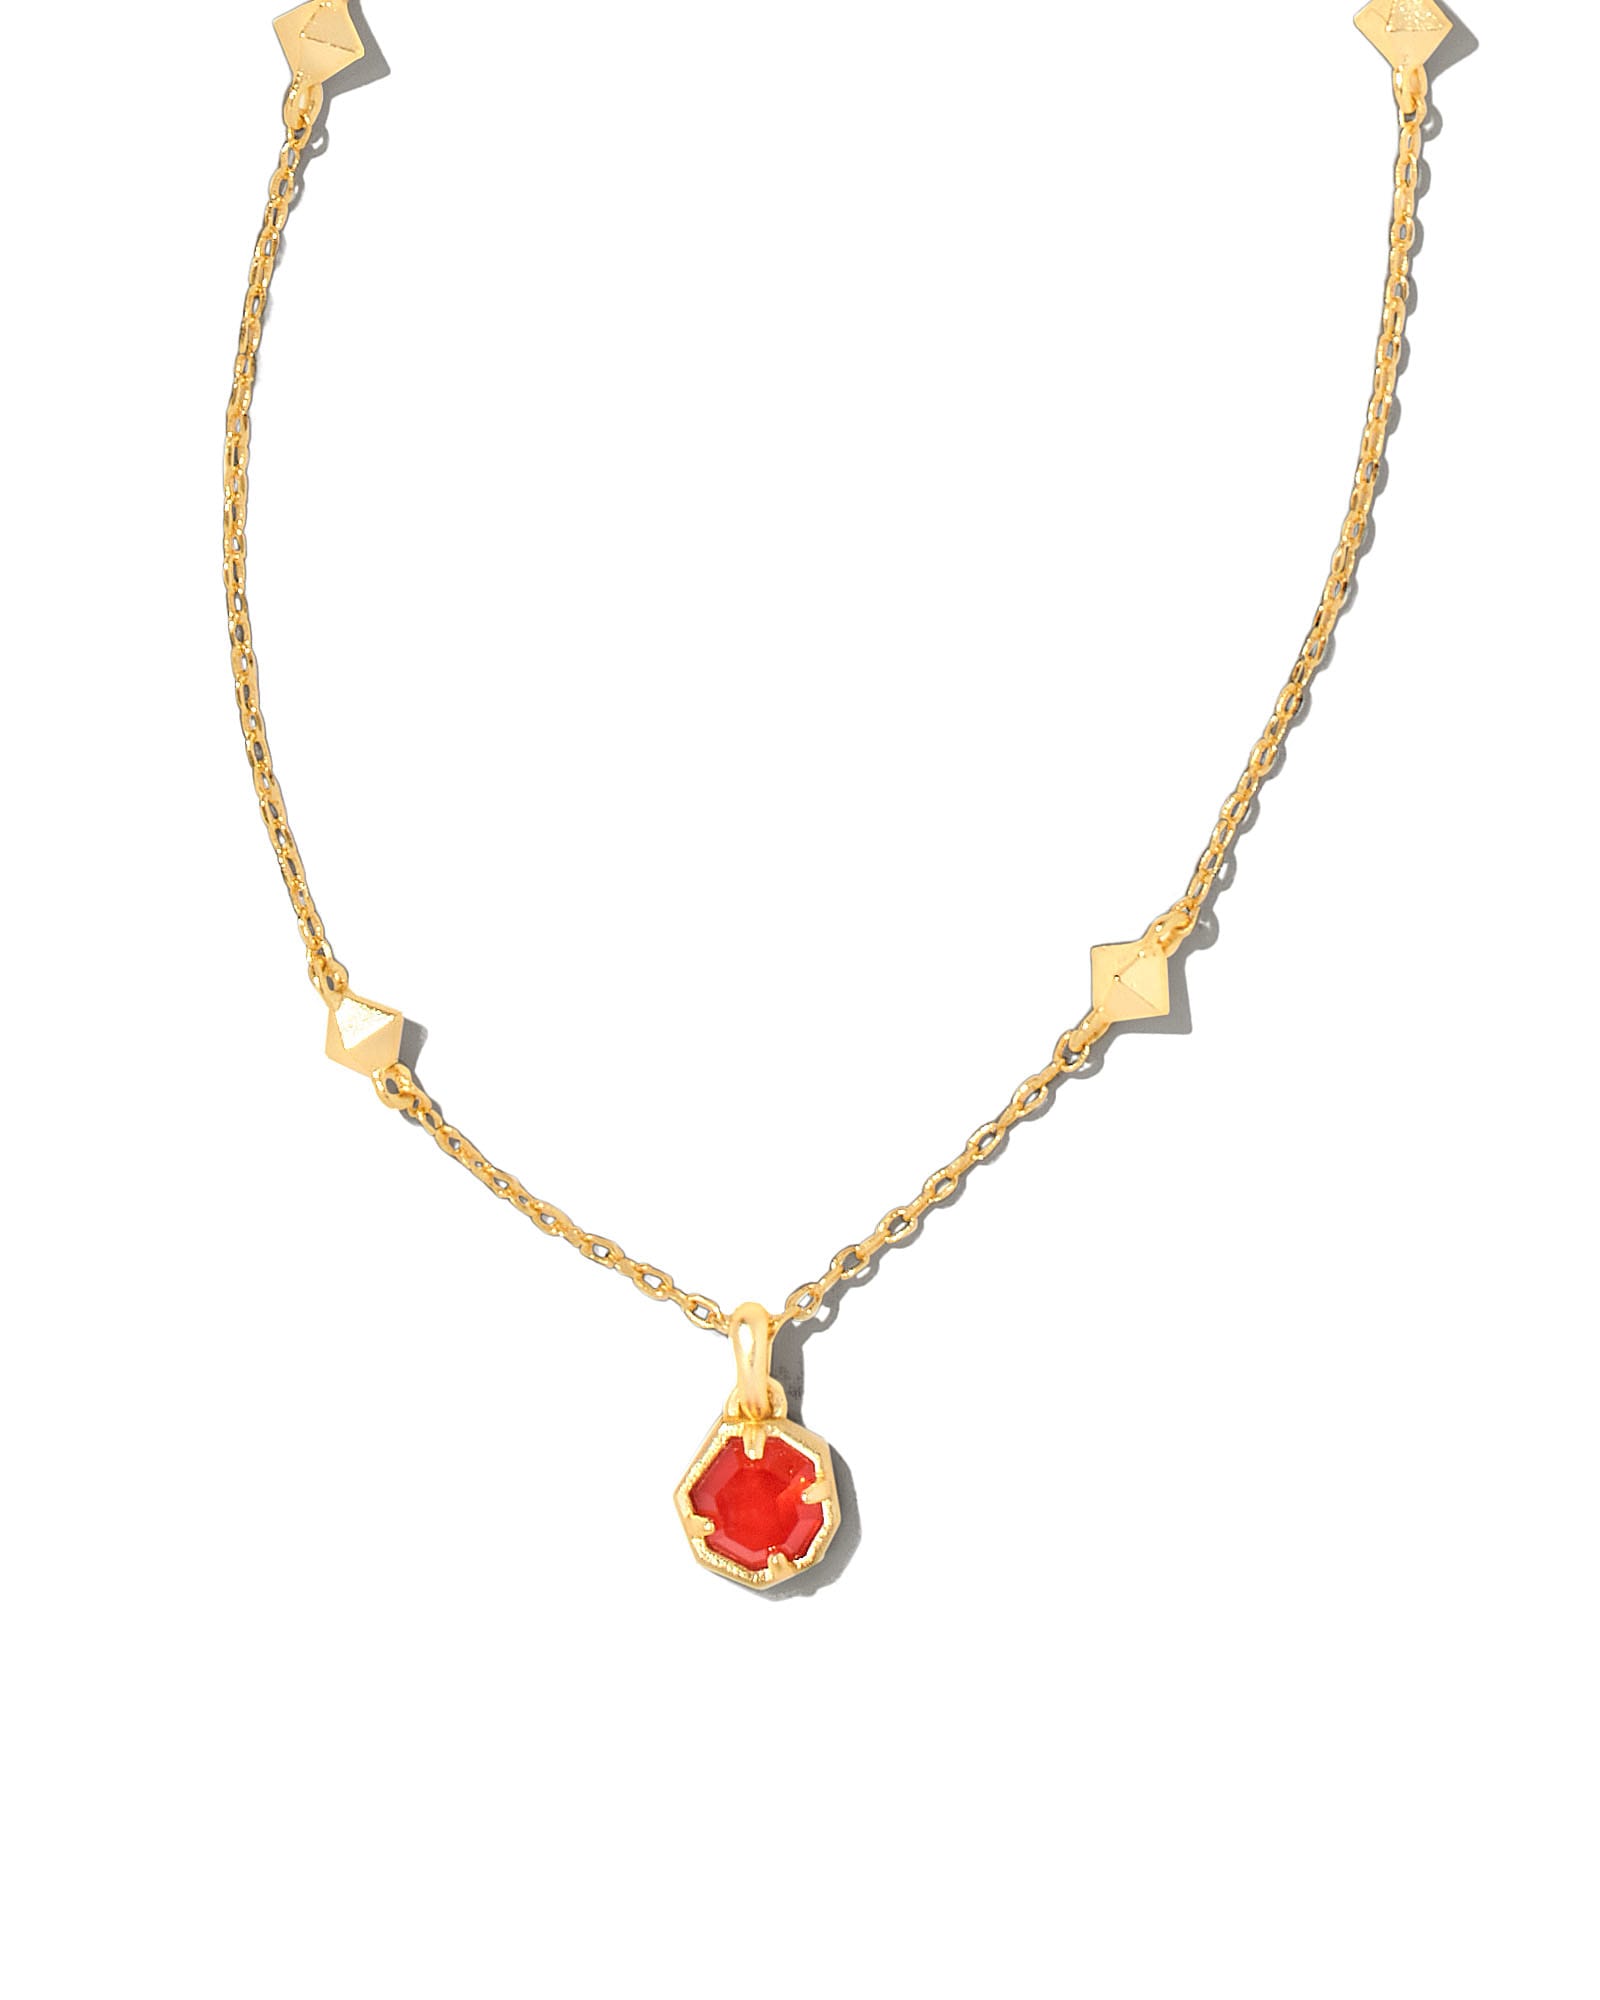 Nola Gold Pendant Necklace in Red Illusion